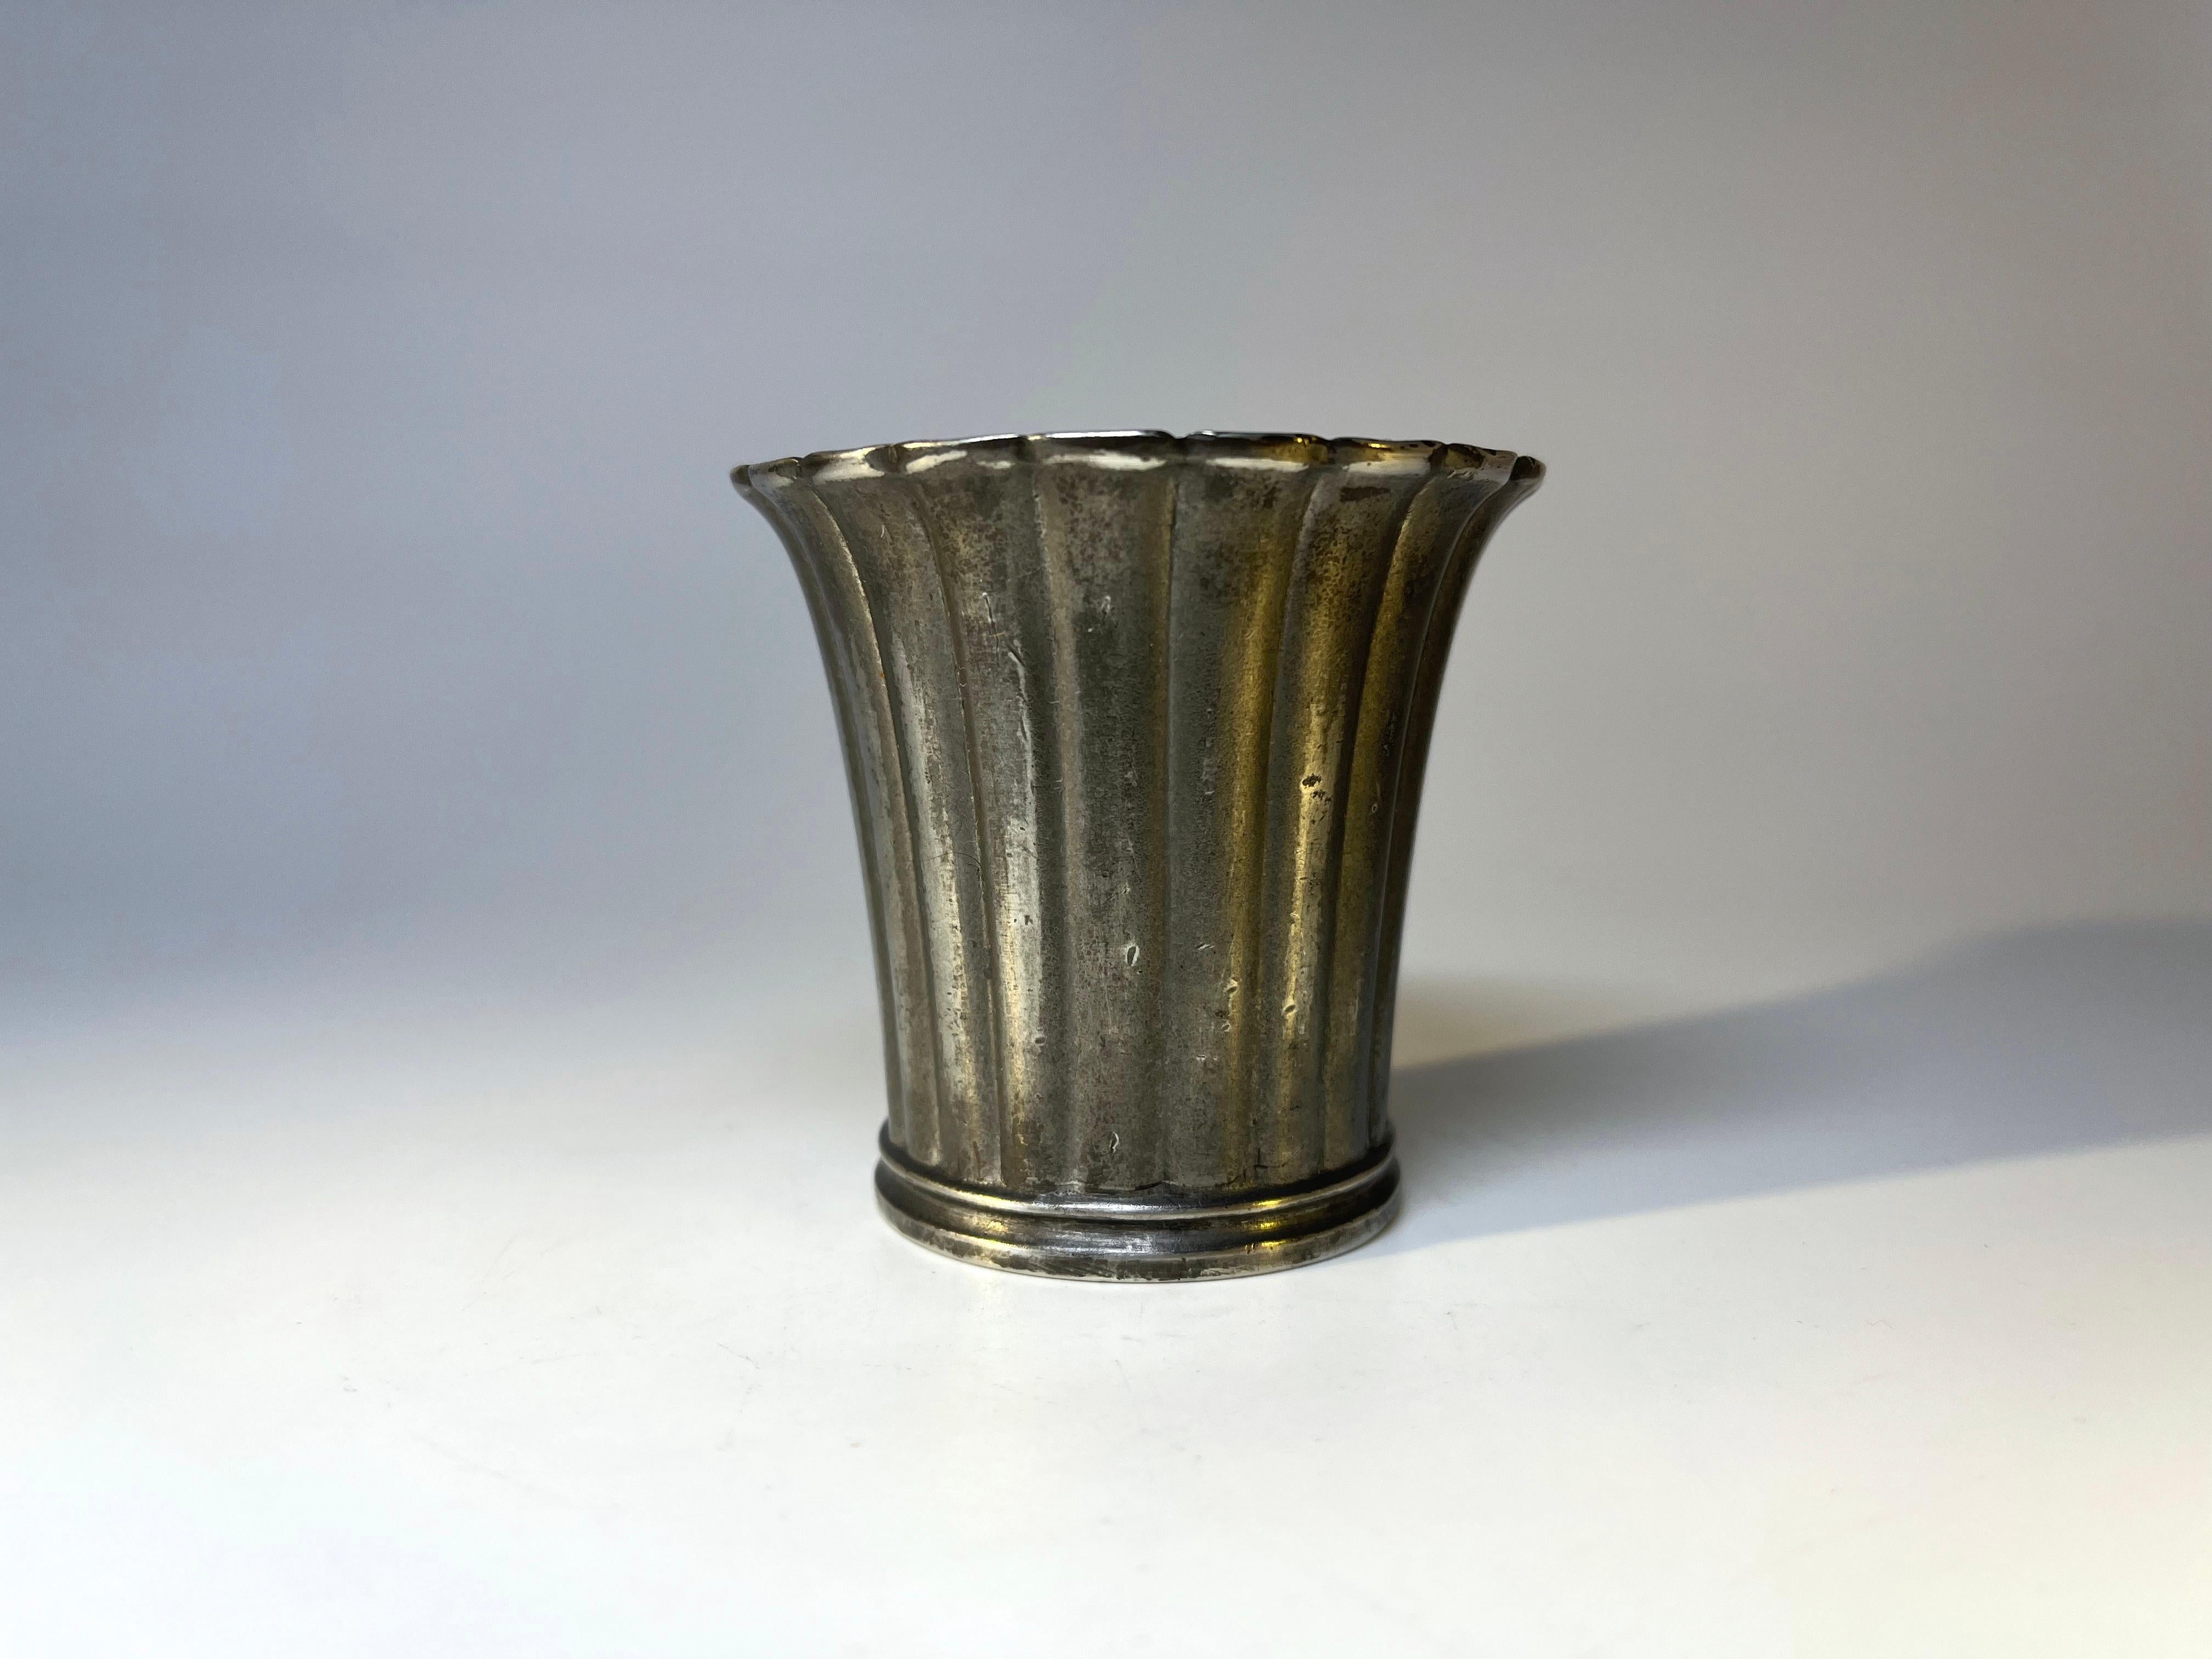 A petite Just Andersen pewter cache pot with fluted rim
Perfect as a desk accessory or purely ornamental
Stamped and numbered 2352 on base
Height 2.5 inch,  Diameter 2.75 inch
In very good condition 